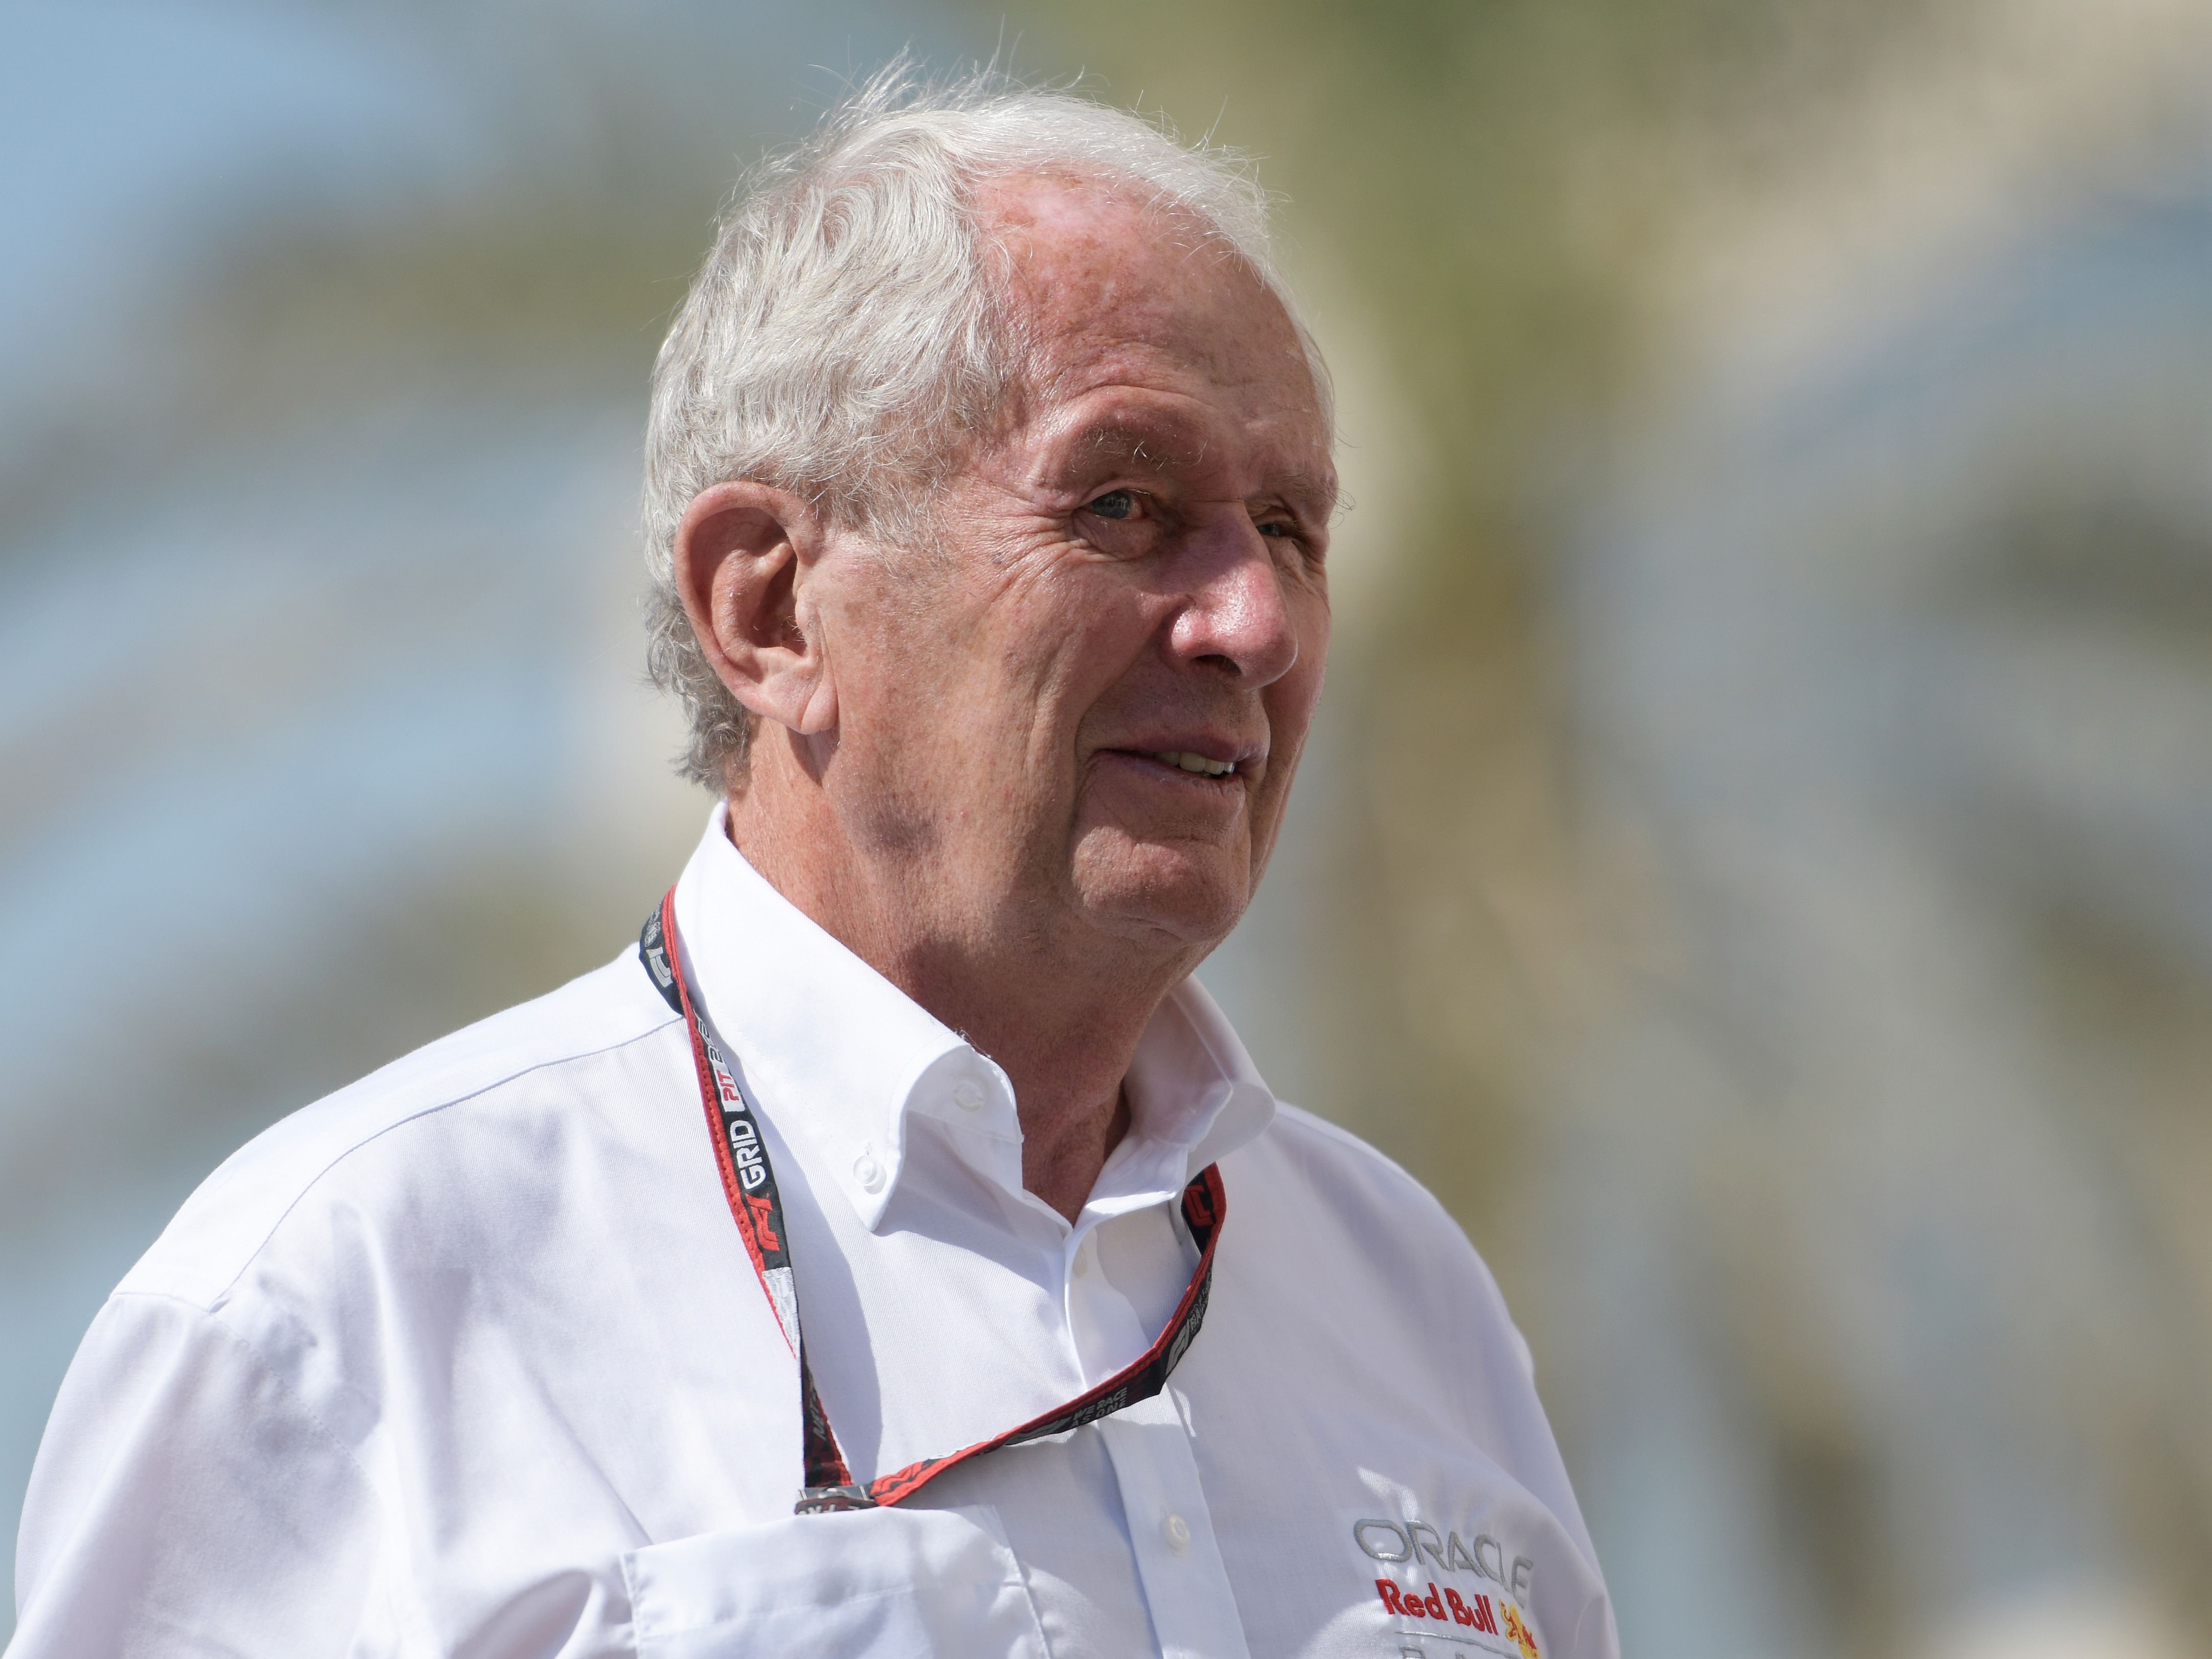 Red Bull Racing Team Consultant Dr. Helmut Marko walks in the paddock prior to practice ahead of the 2022 F1 Abu Dhabi Grand Prix. (Photo by Rudy Carezzevoli/Getty Images)